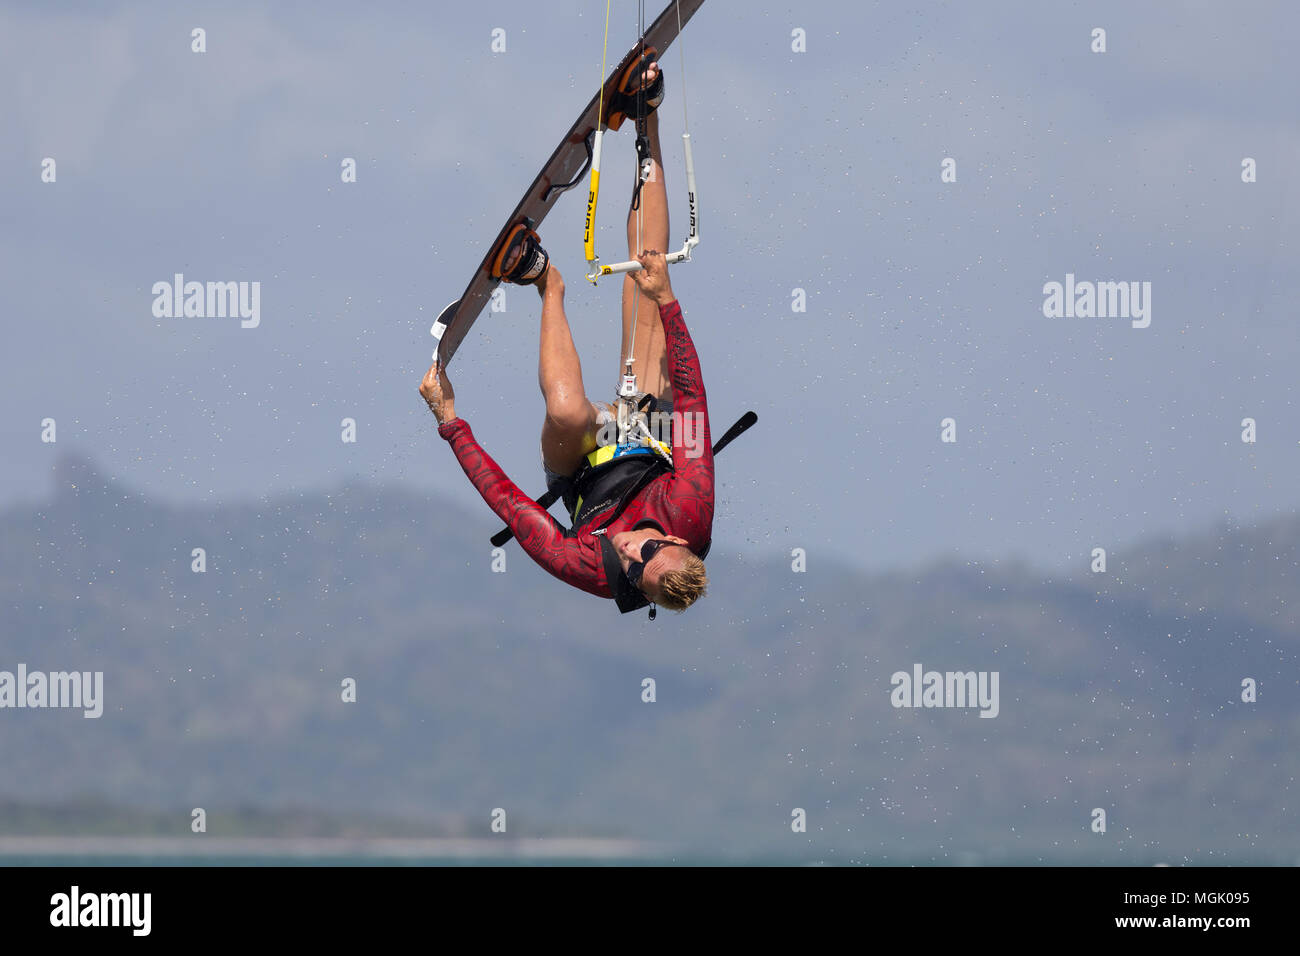 Stunt jumping during a kitesurf session Stock Photo